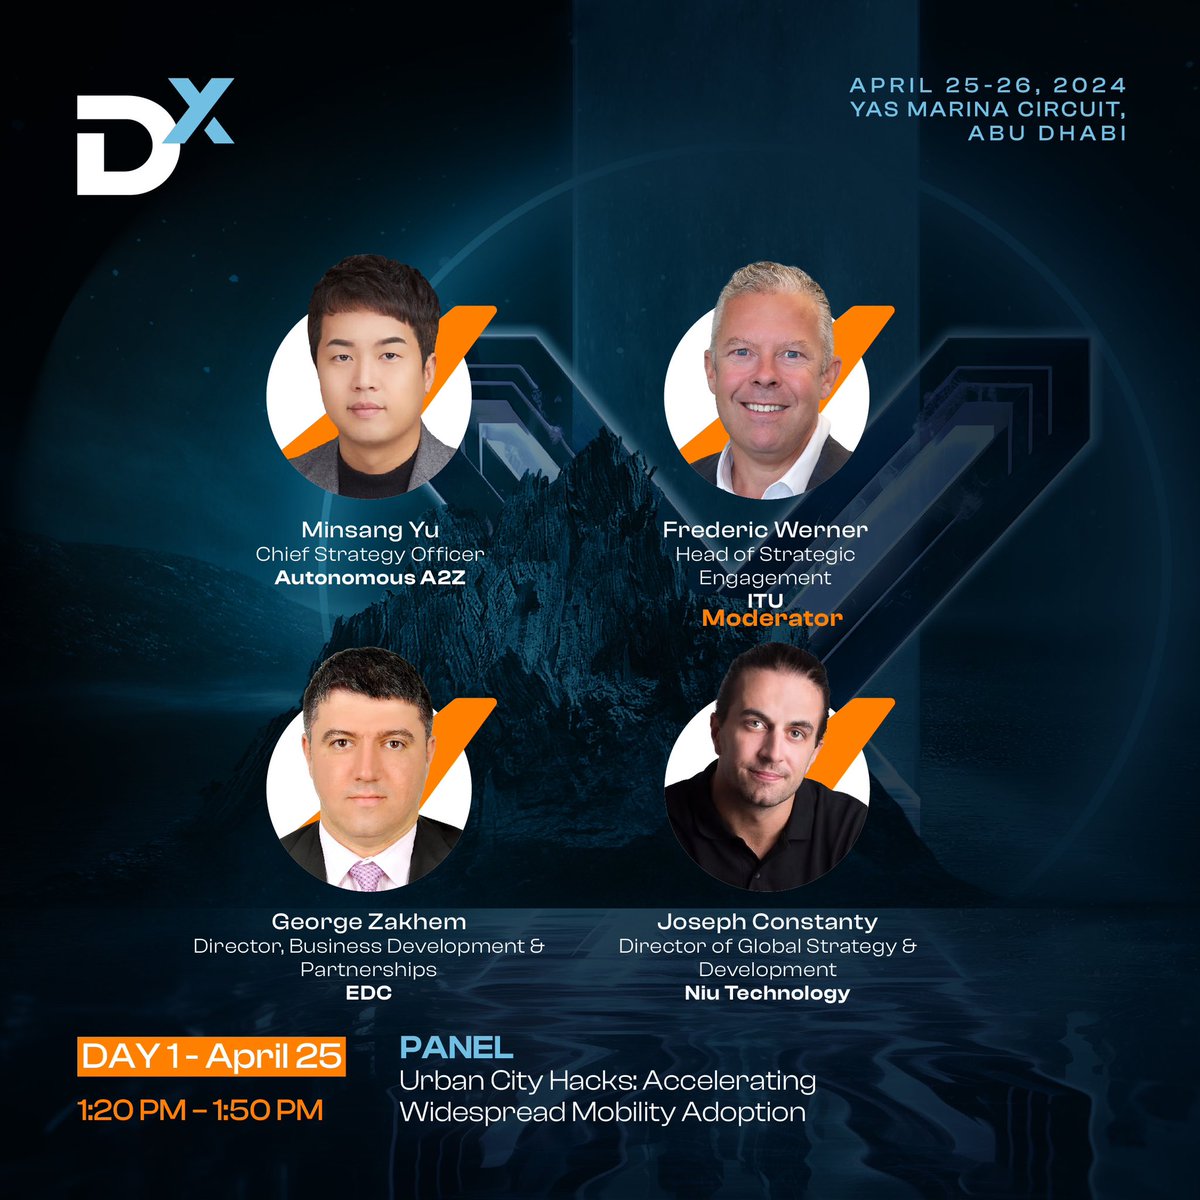 Uncover the secrets to Accelerating Widespread Mobility Adoption in our dynamic panel discussion! Let’s delve into strategies, insights, and innovations driving the rapid adoption of mobility solutions worldwide! @Bayanatg42 @InvestAbuDhabi @saviabudhabi @AbuDhabiDMT